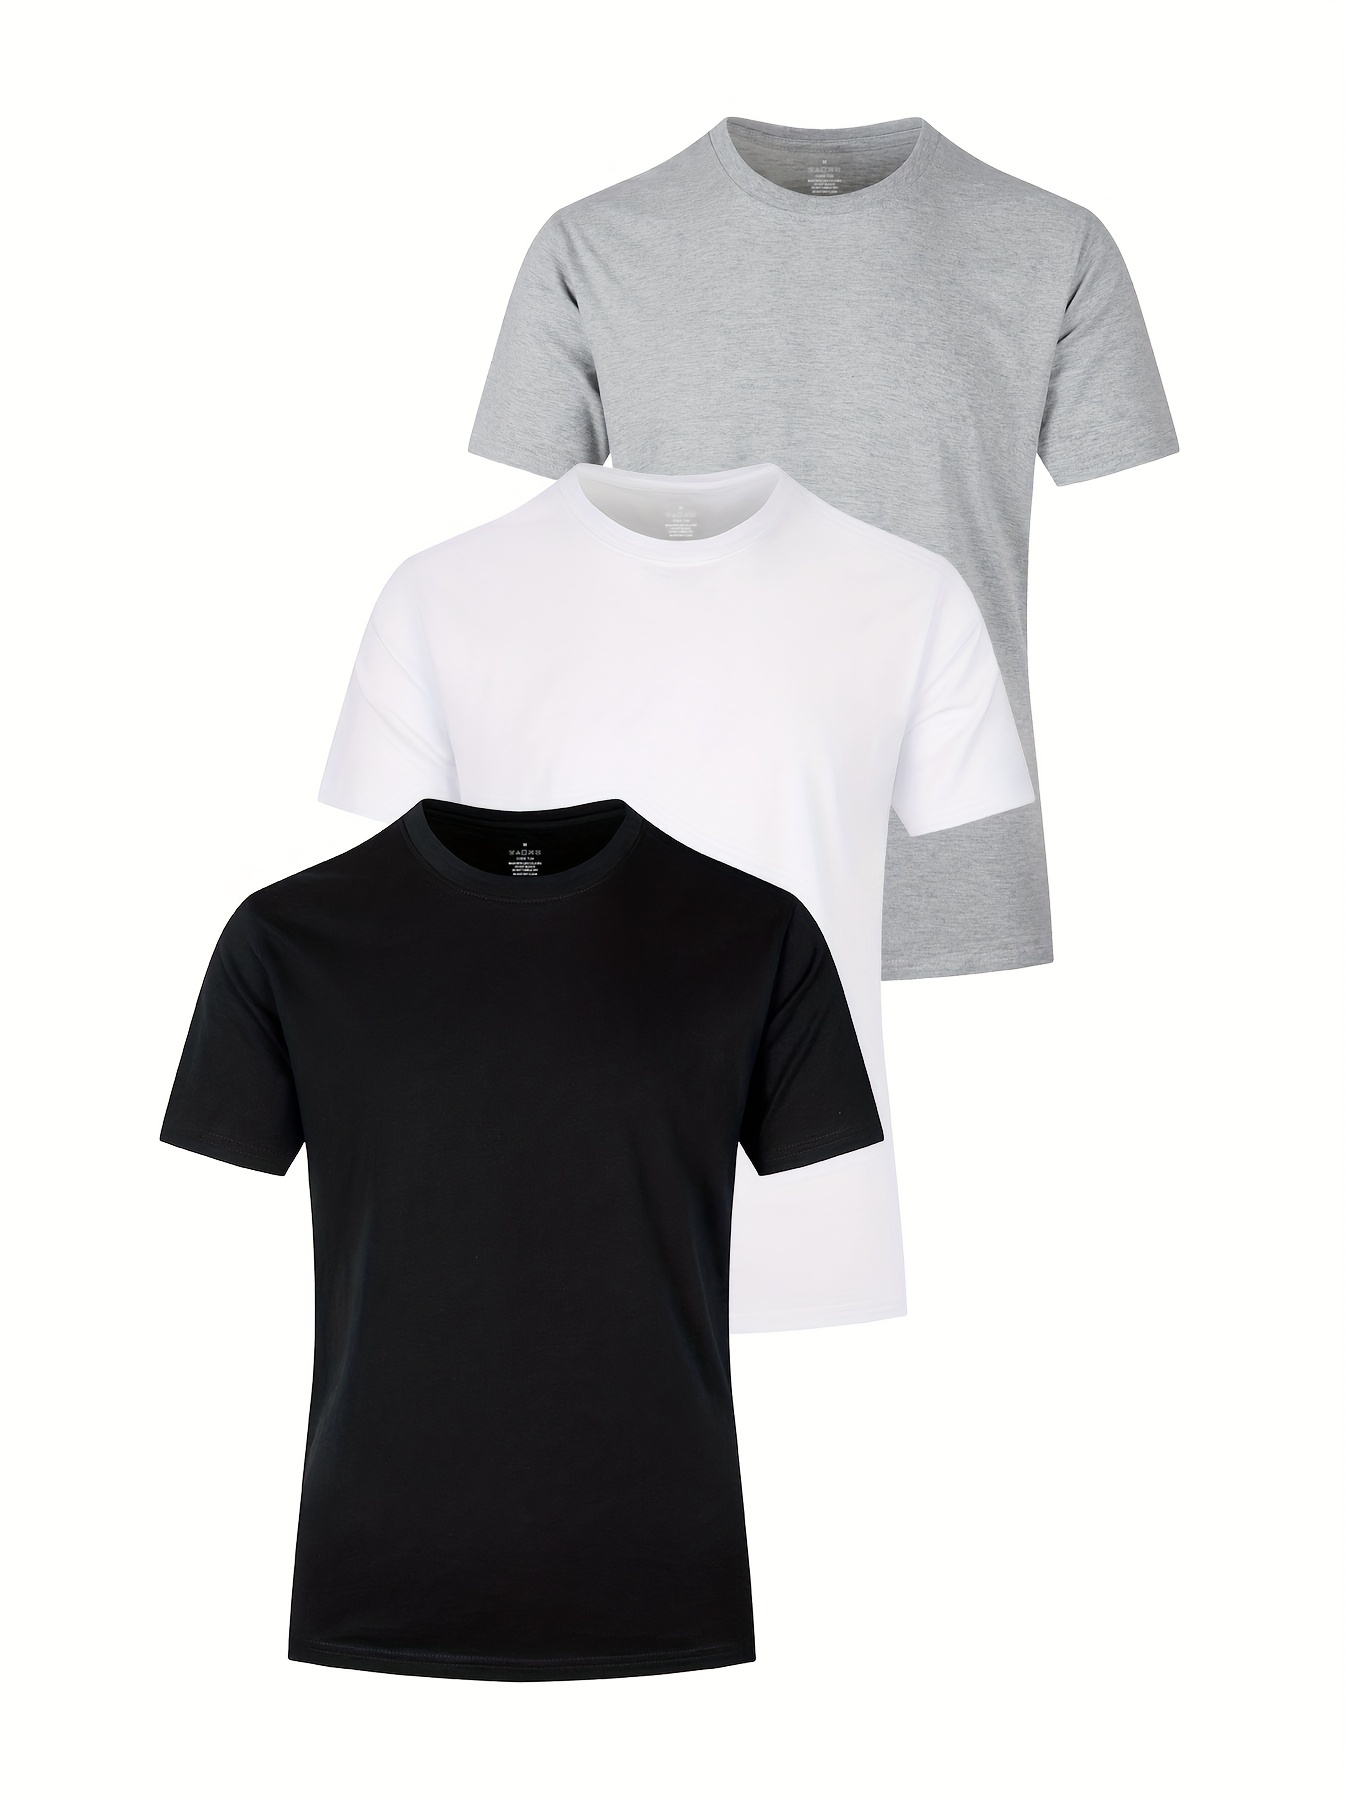 Simplmasygenix Clearance Mens Tops Summer Men Casual Solid Slim-fit Short  Sleeve Round Neck T-Shirt Blouse 